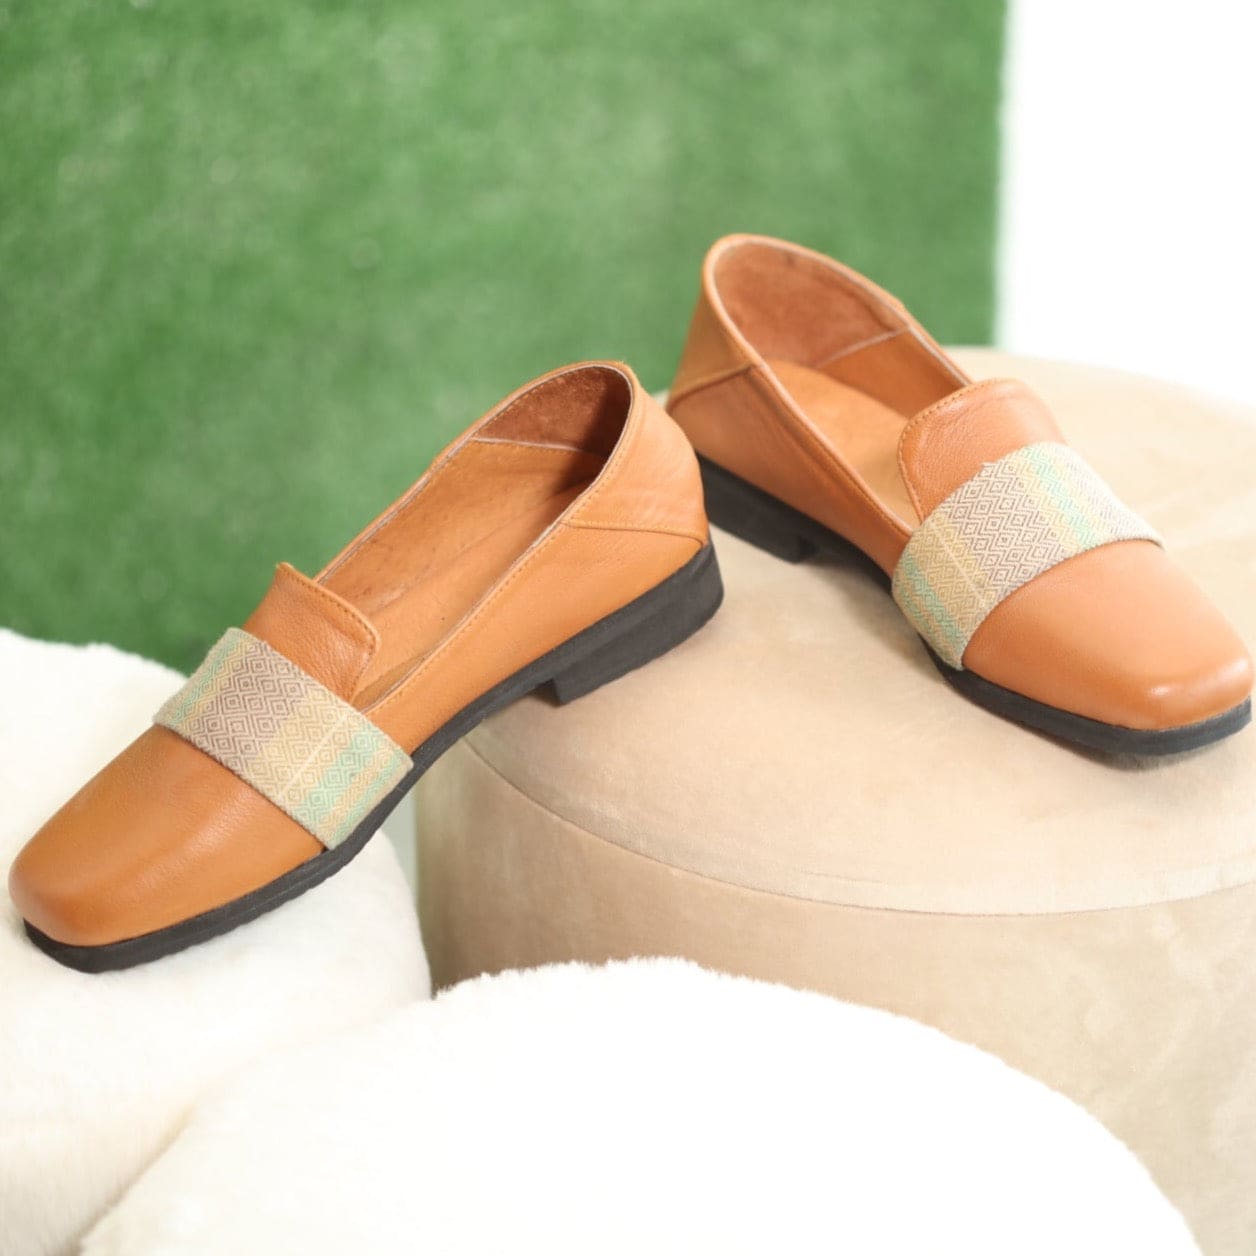 Denise Convertible Loafer